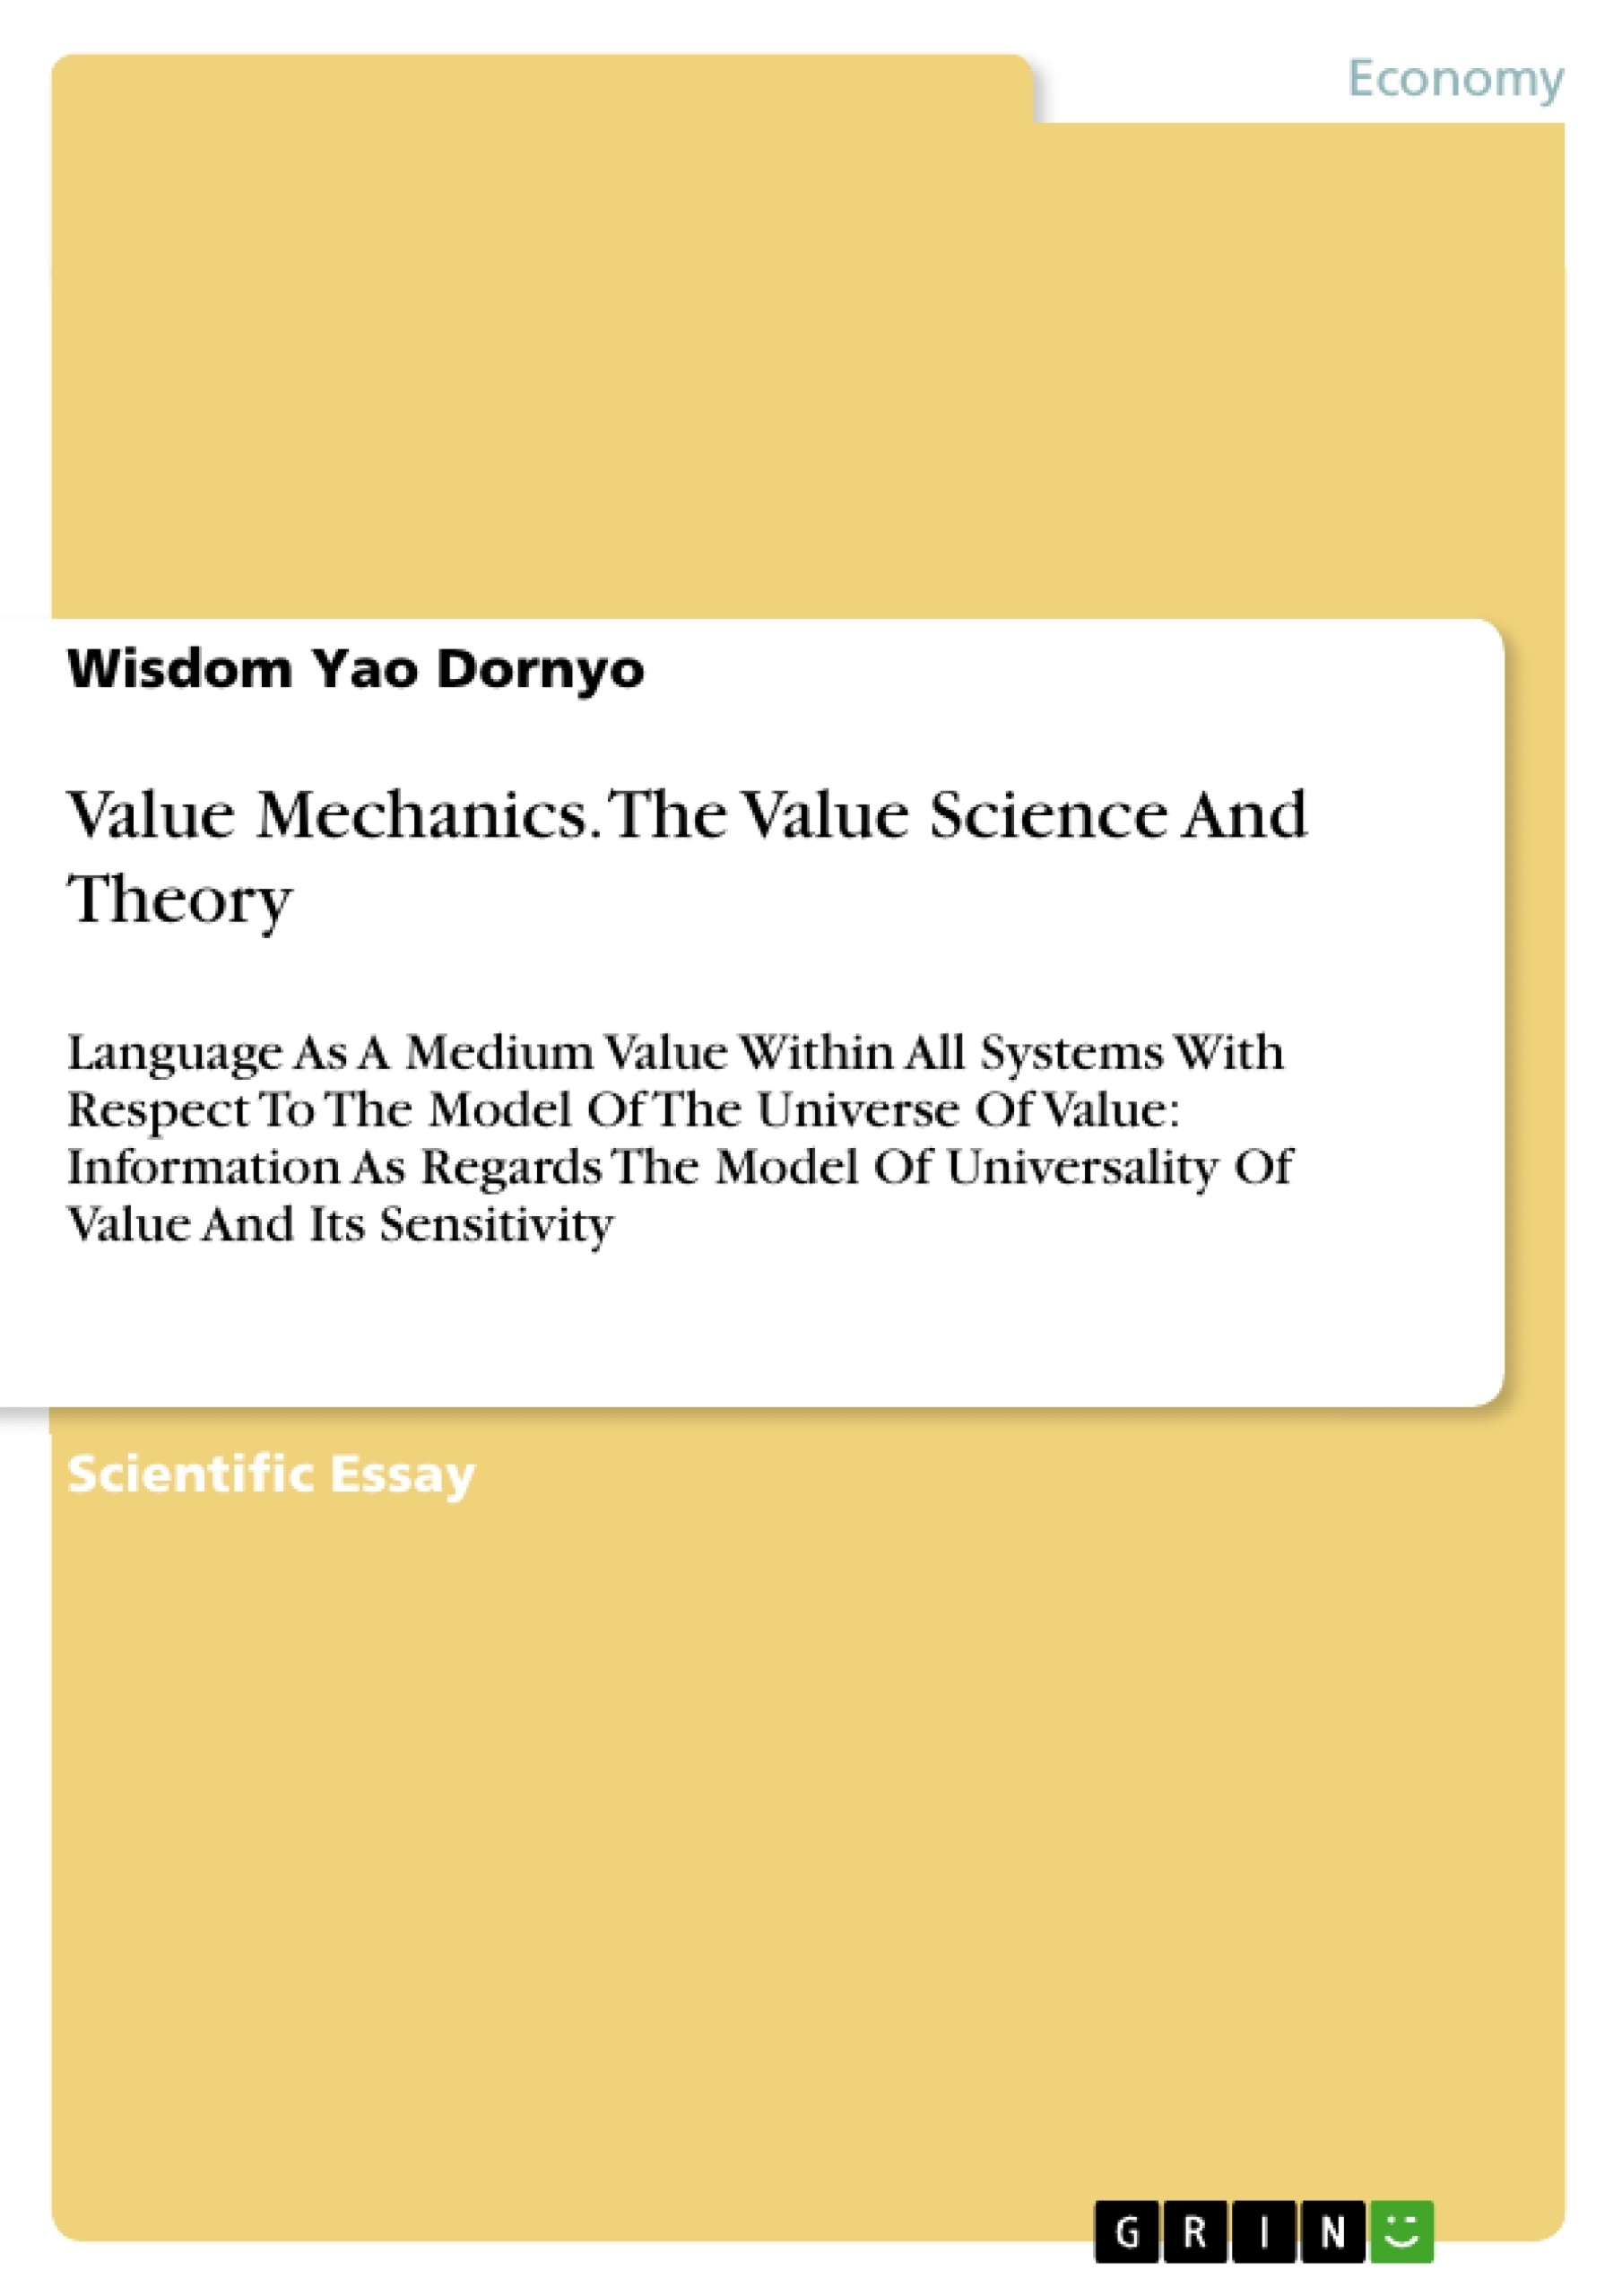 Title: Value Mechanics. The Value Science And Theory